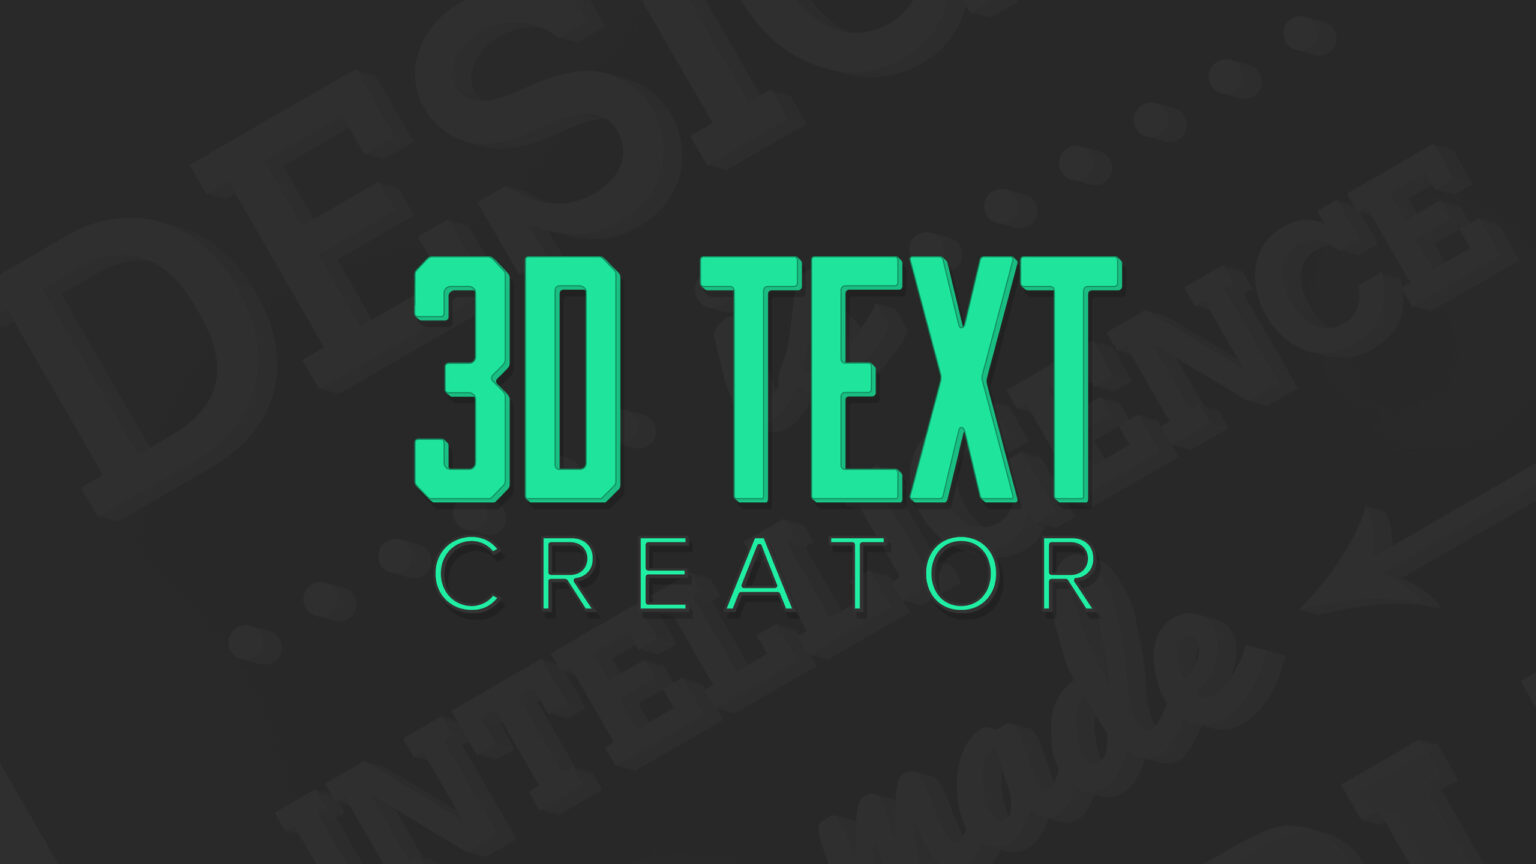 font style cool fancy text generator